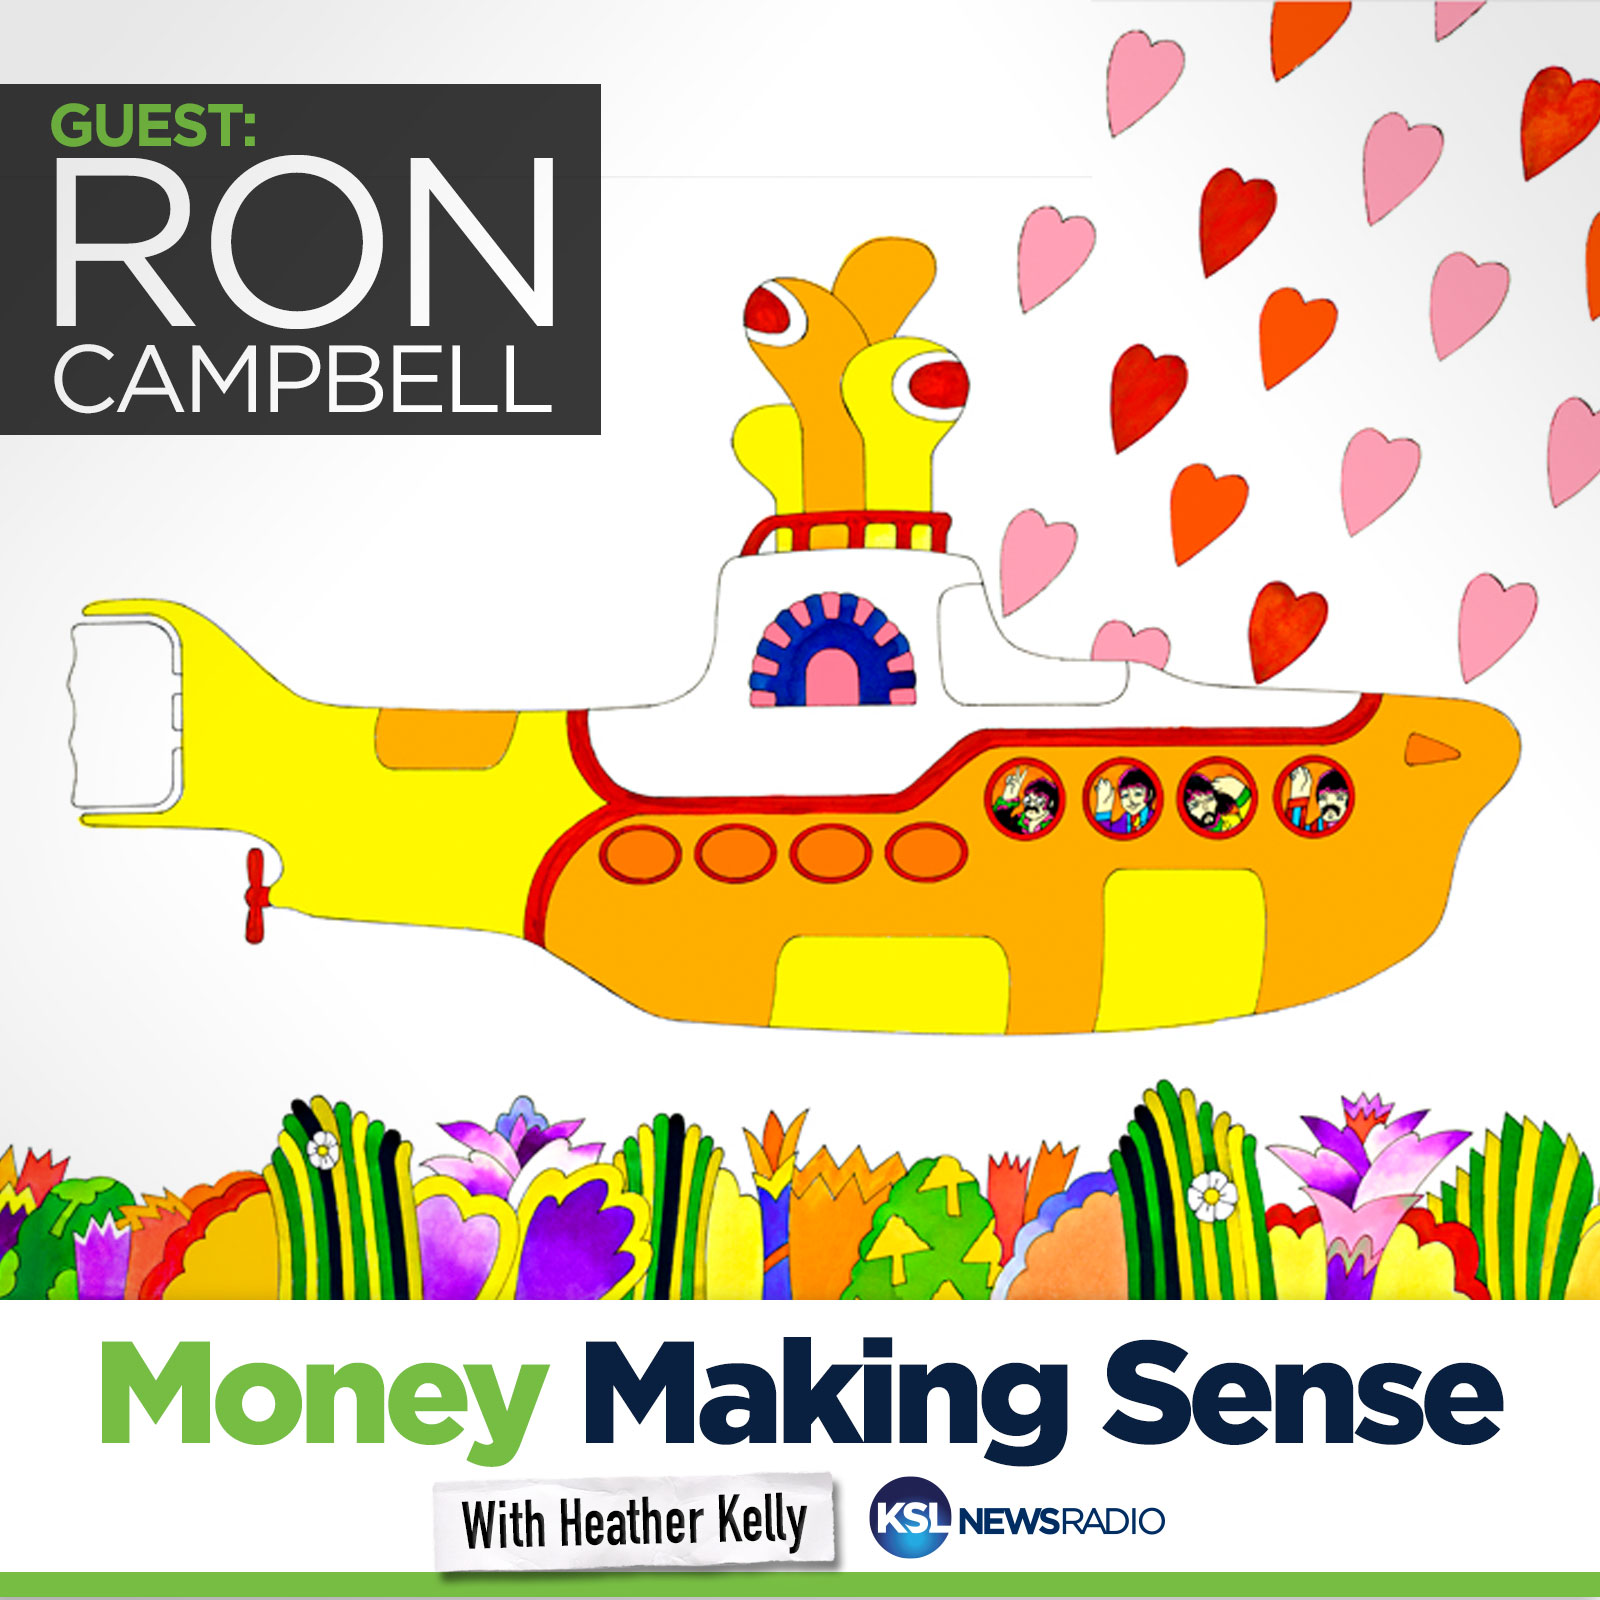 Animators make great money with Ron Campbell